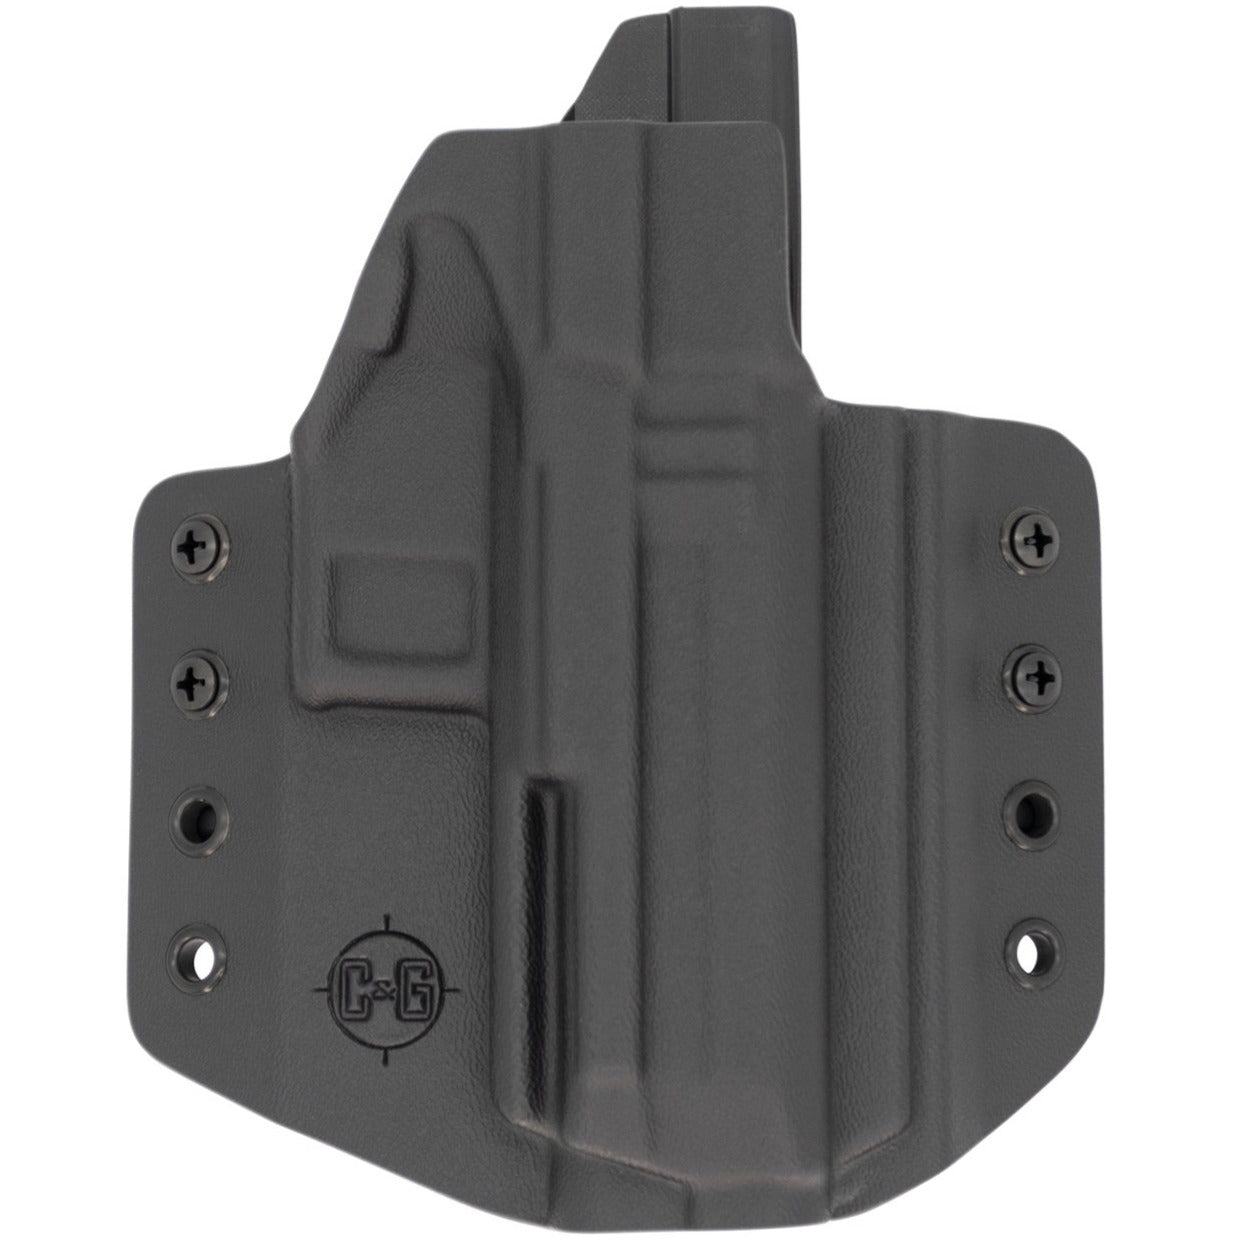 This is a C&G Holsters Covert Series Outside the waistband holster for an IWI Masada 9mm firearm showing the front without the gun. 